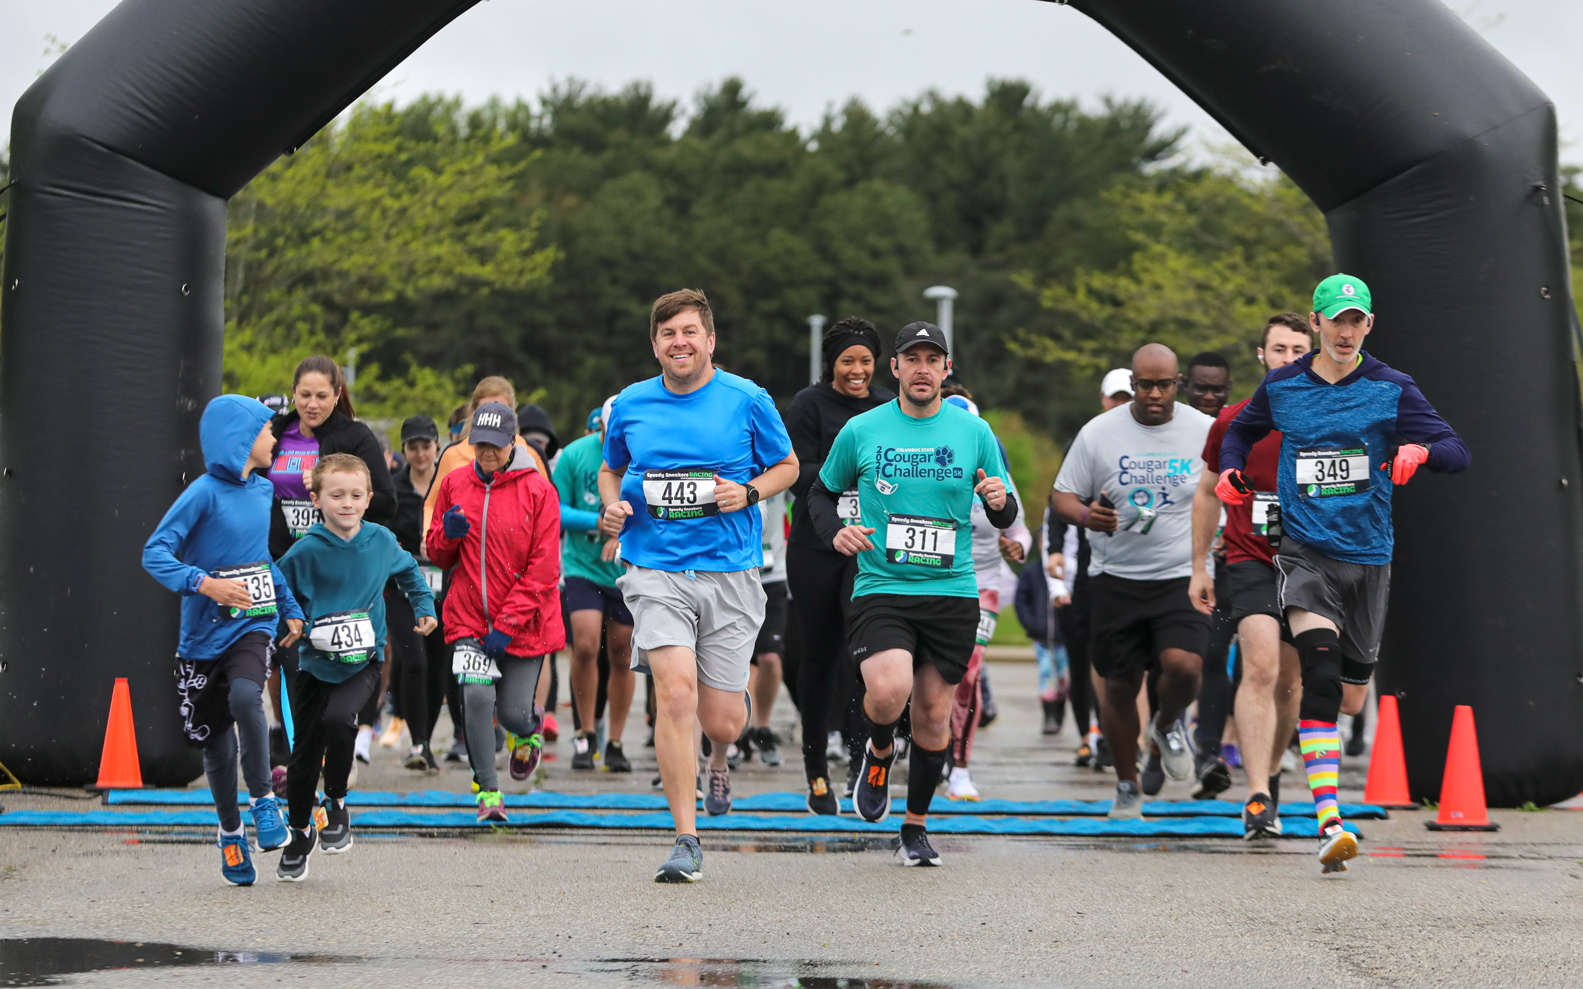 Runners take off as the annual 5K got under on Saturday, May 7 on the Delaware Campus. Brett Welsh, wearing the light blue shirt and number 443, finished in first place with a time of 19 minutes and 16 seconds. Welsh is the director of Student Engagement & Inclusion.